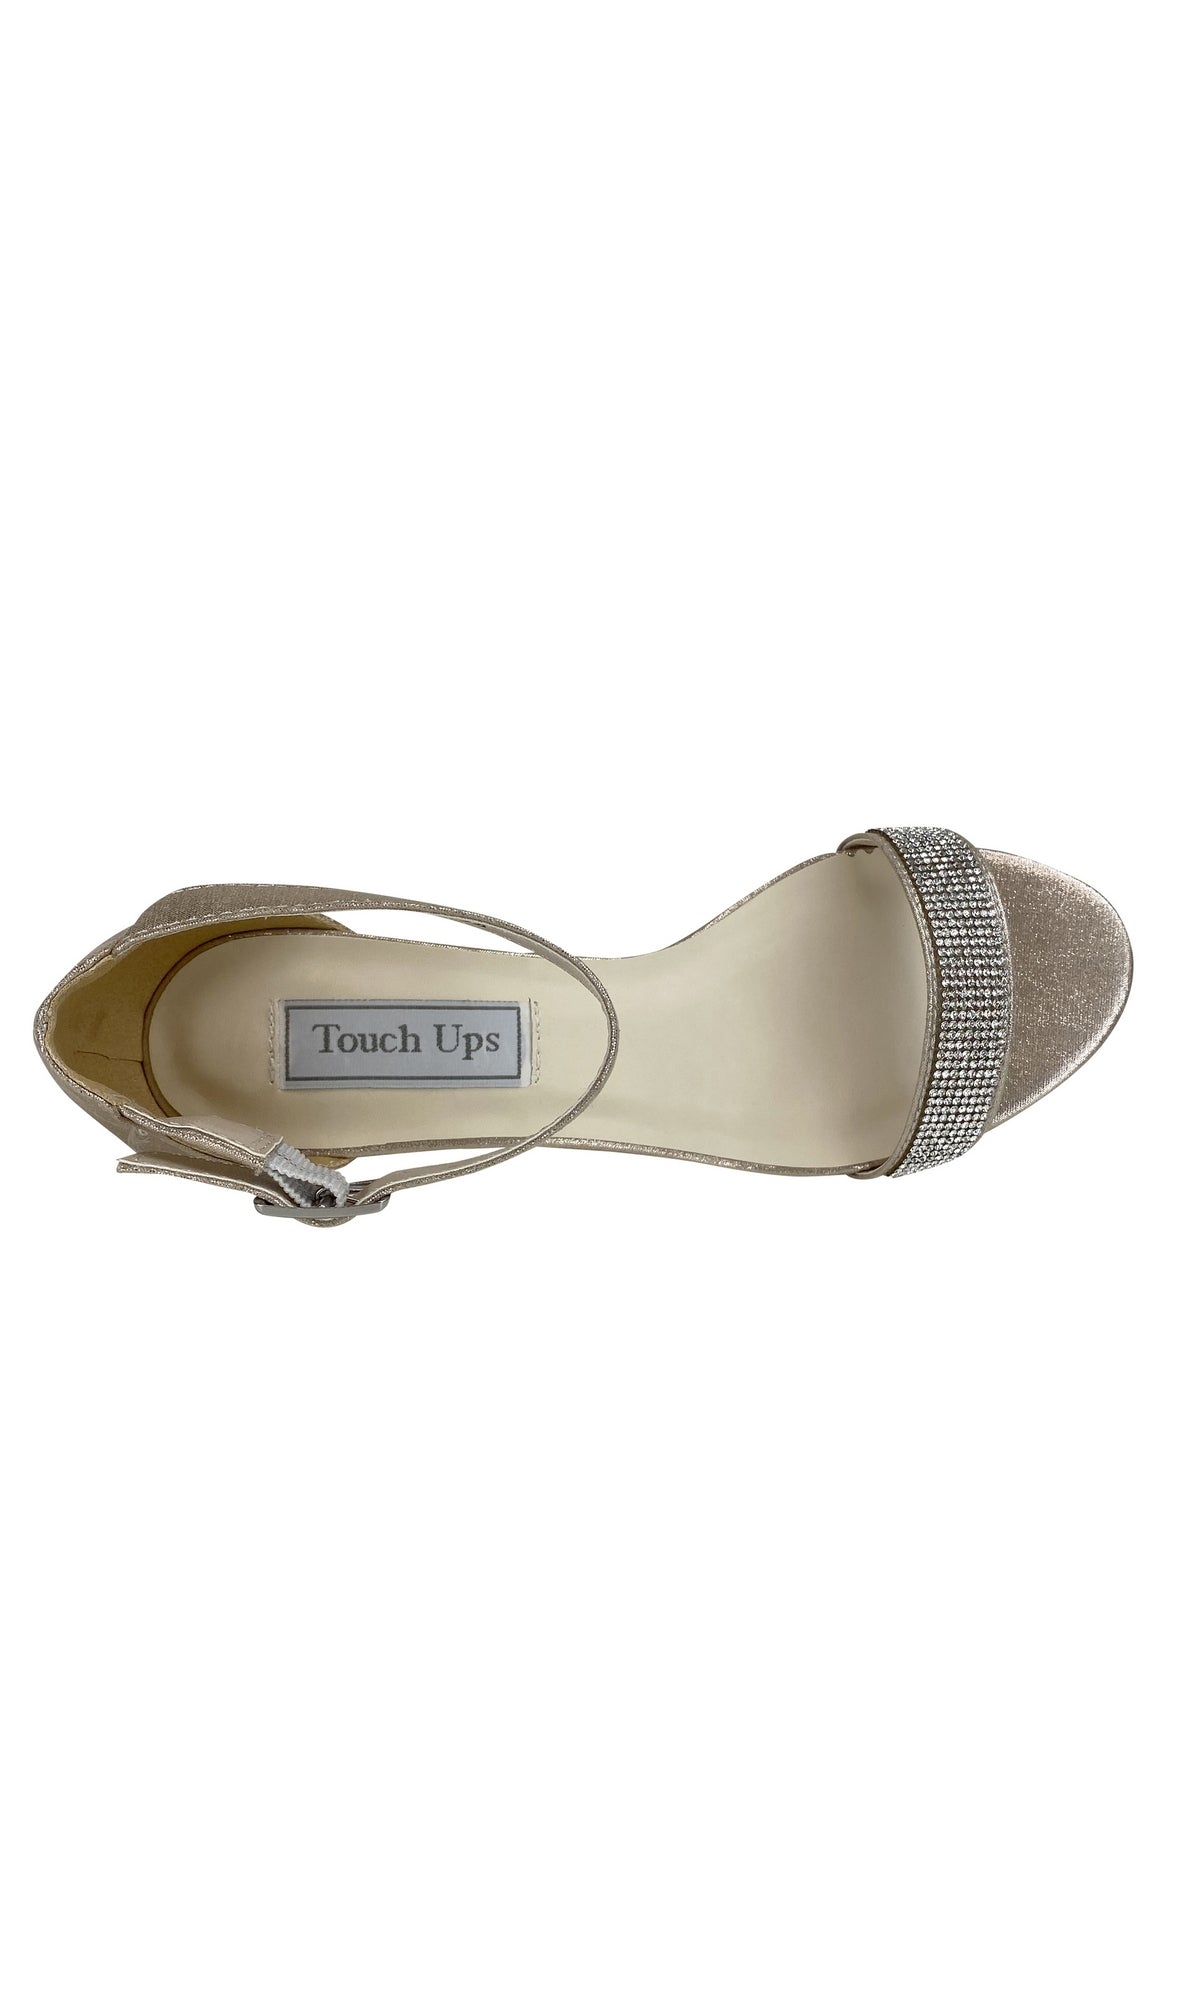 Champagne Low Heel Prom Shoes 4333 by Touch Ups